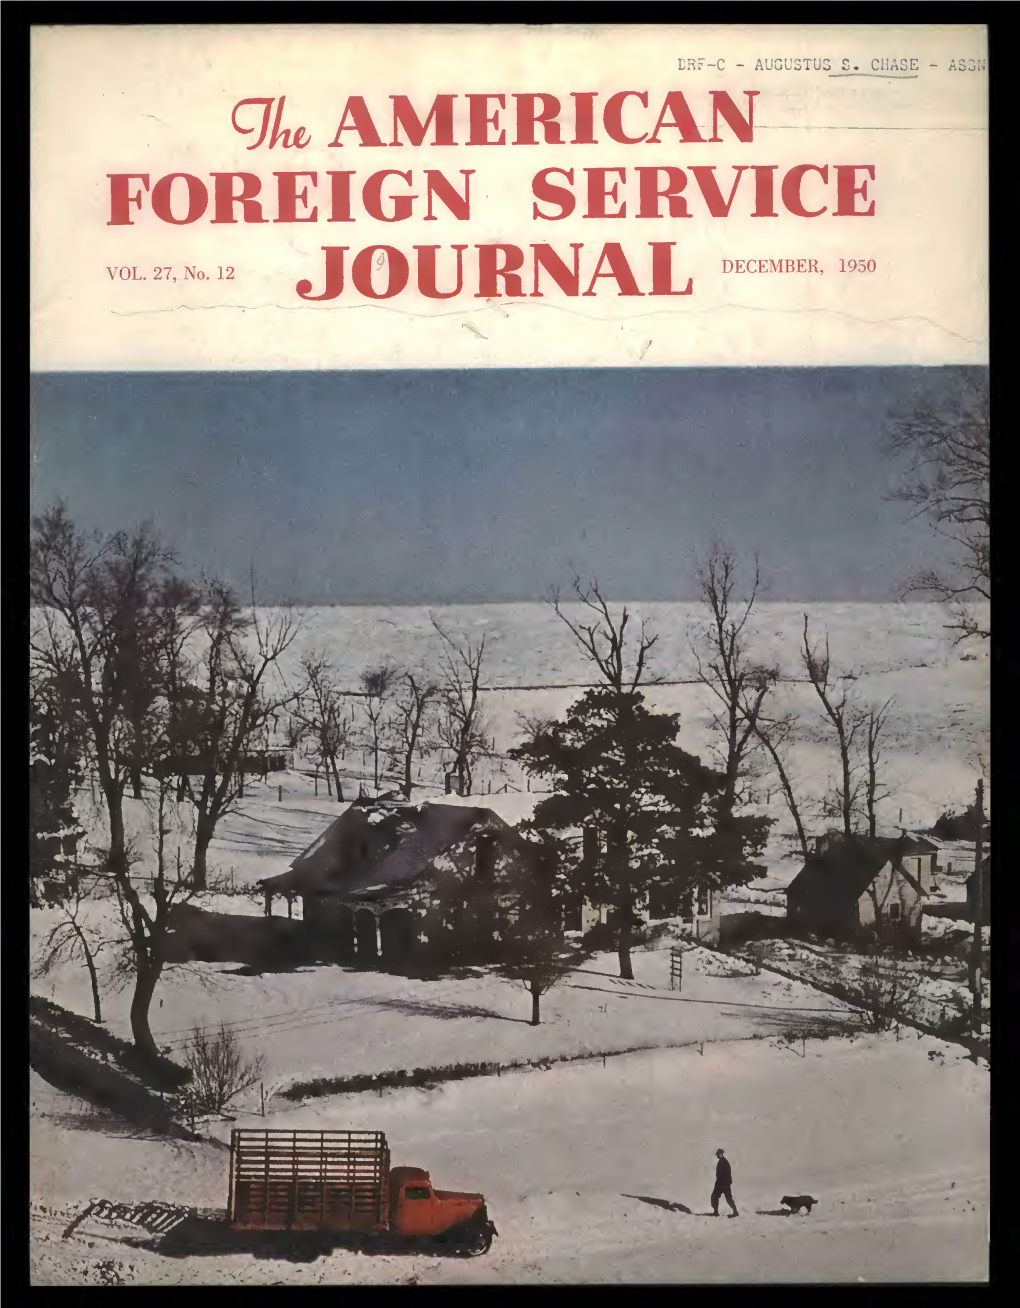 The Foreign Service Journal, December 1950